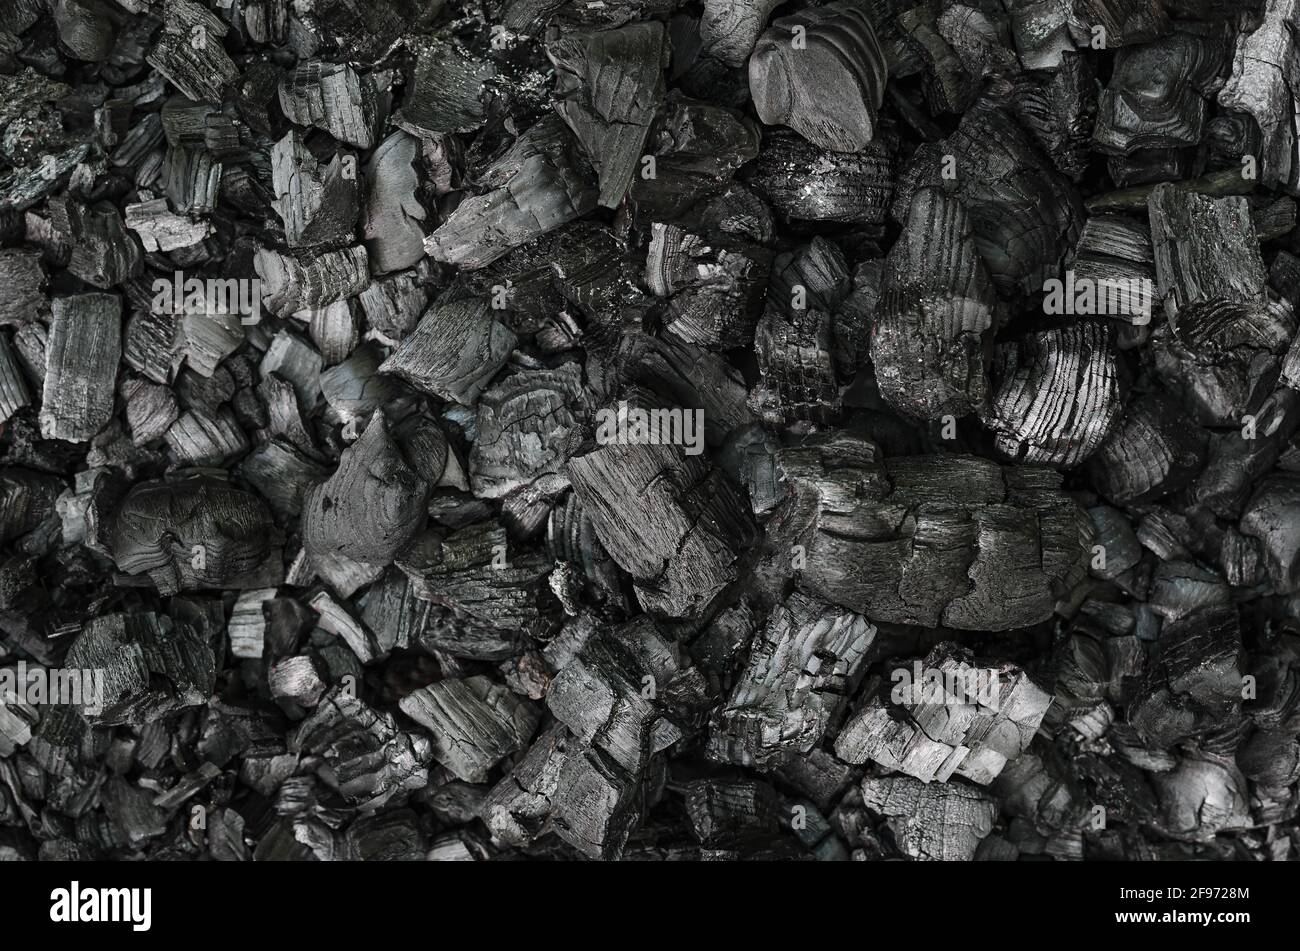 Black and gray pieces of burnt branches, in the remains of an extinguished fire. Charred branches and big chunks of charcoal on the ground. Stock Photo